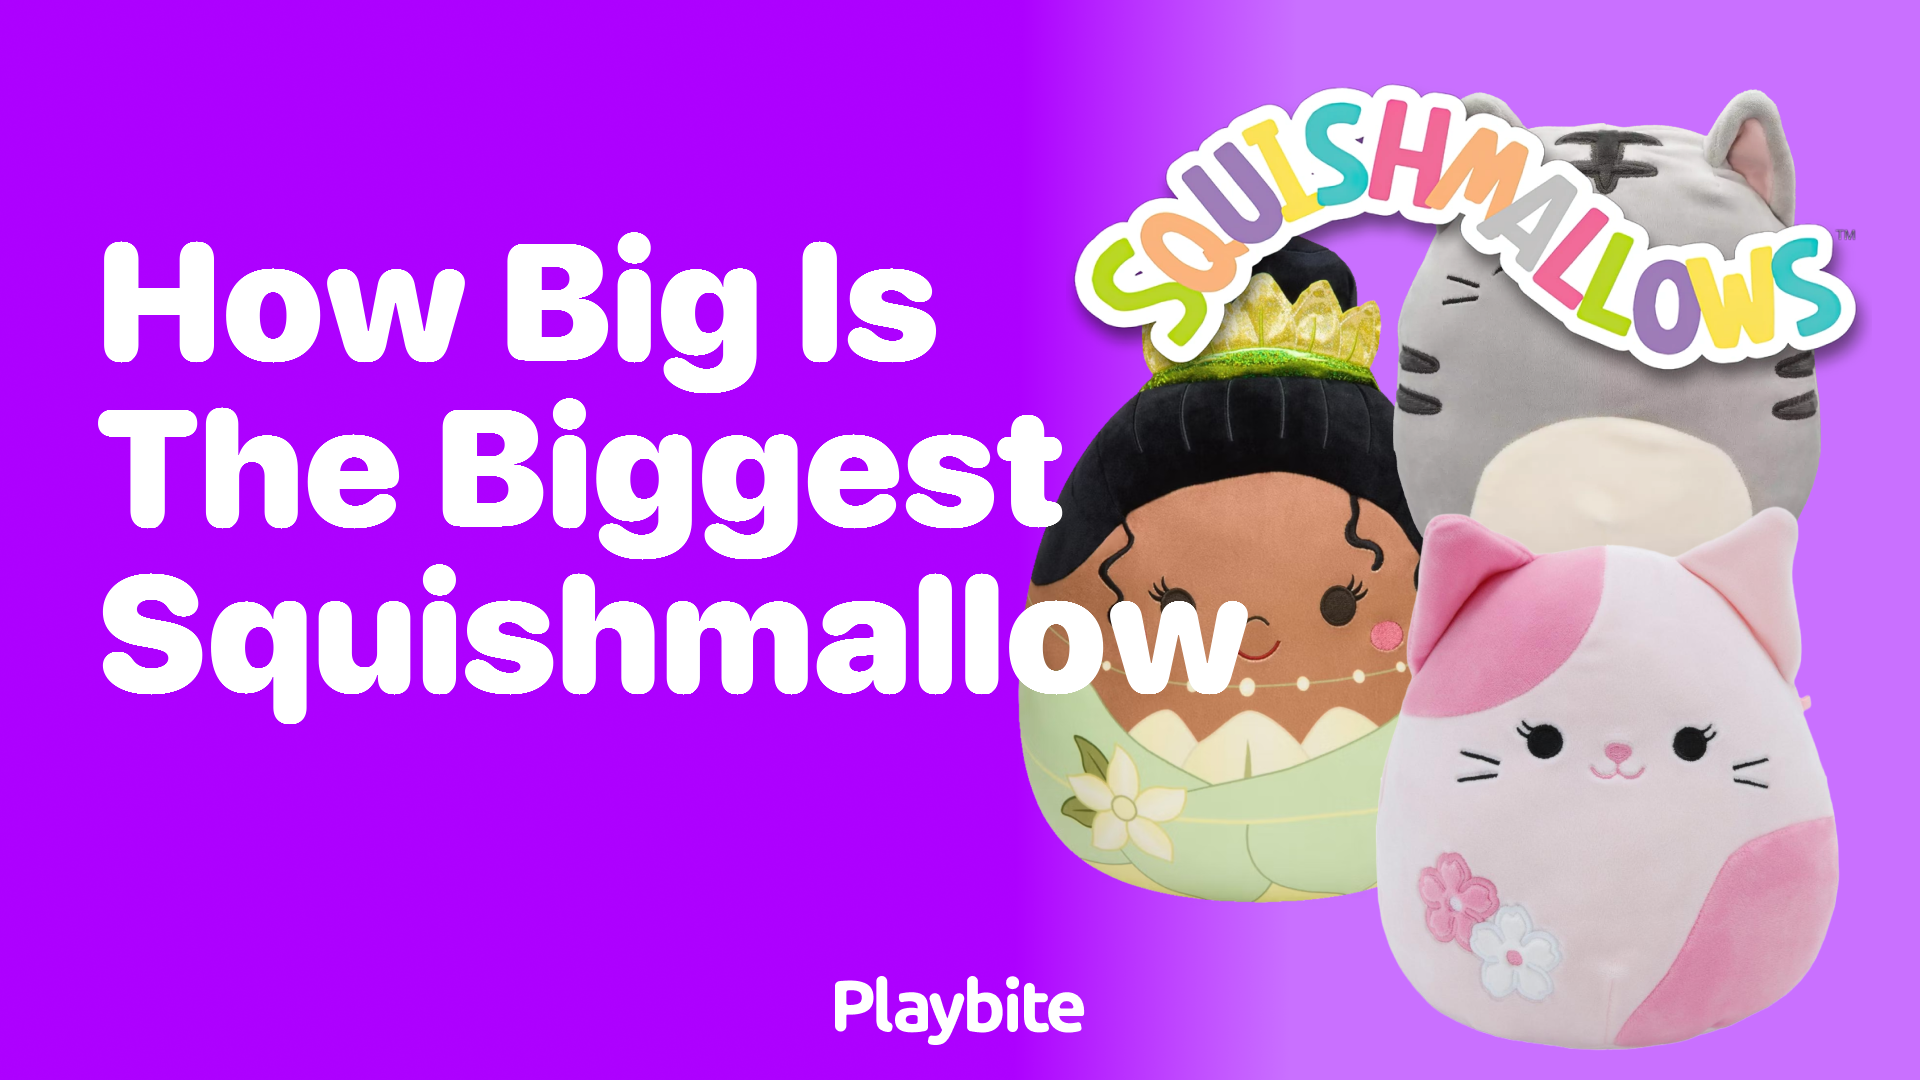 How Big is the Biggest Squishmallow? Discover the Giant Squish